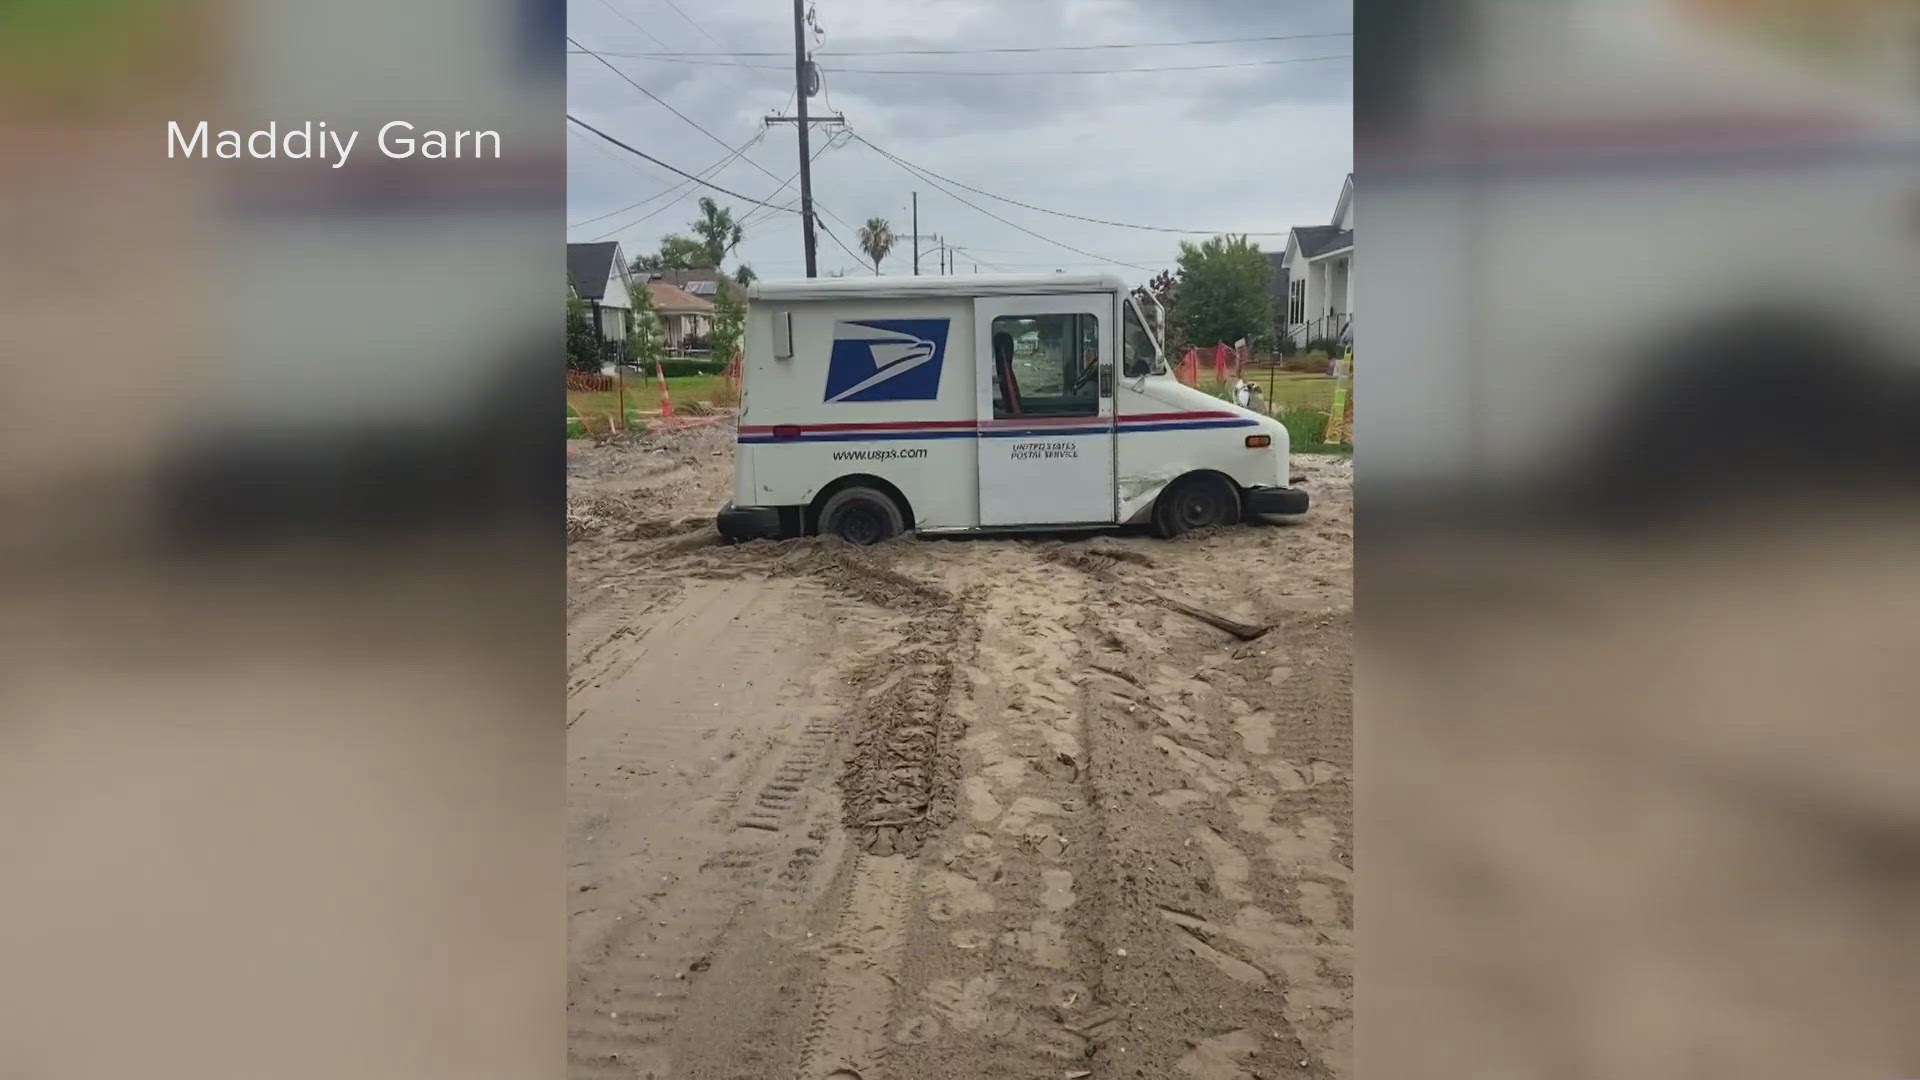 It ended up being a slow delivery day for one Gentilly neighborhood. Monday this video was posted online, showing a USPS truck stuck in construction mud.